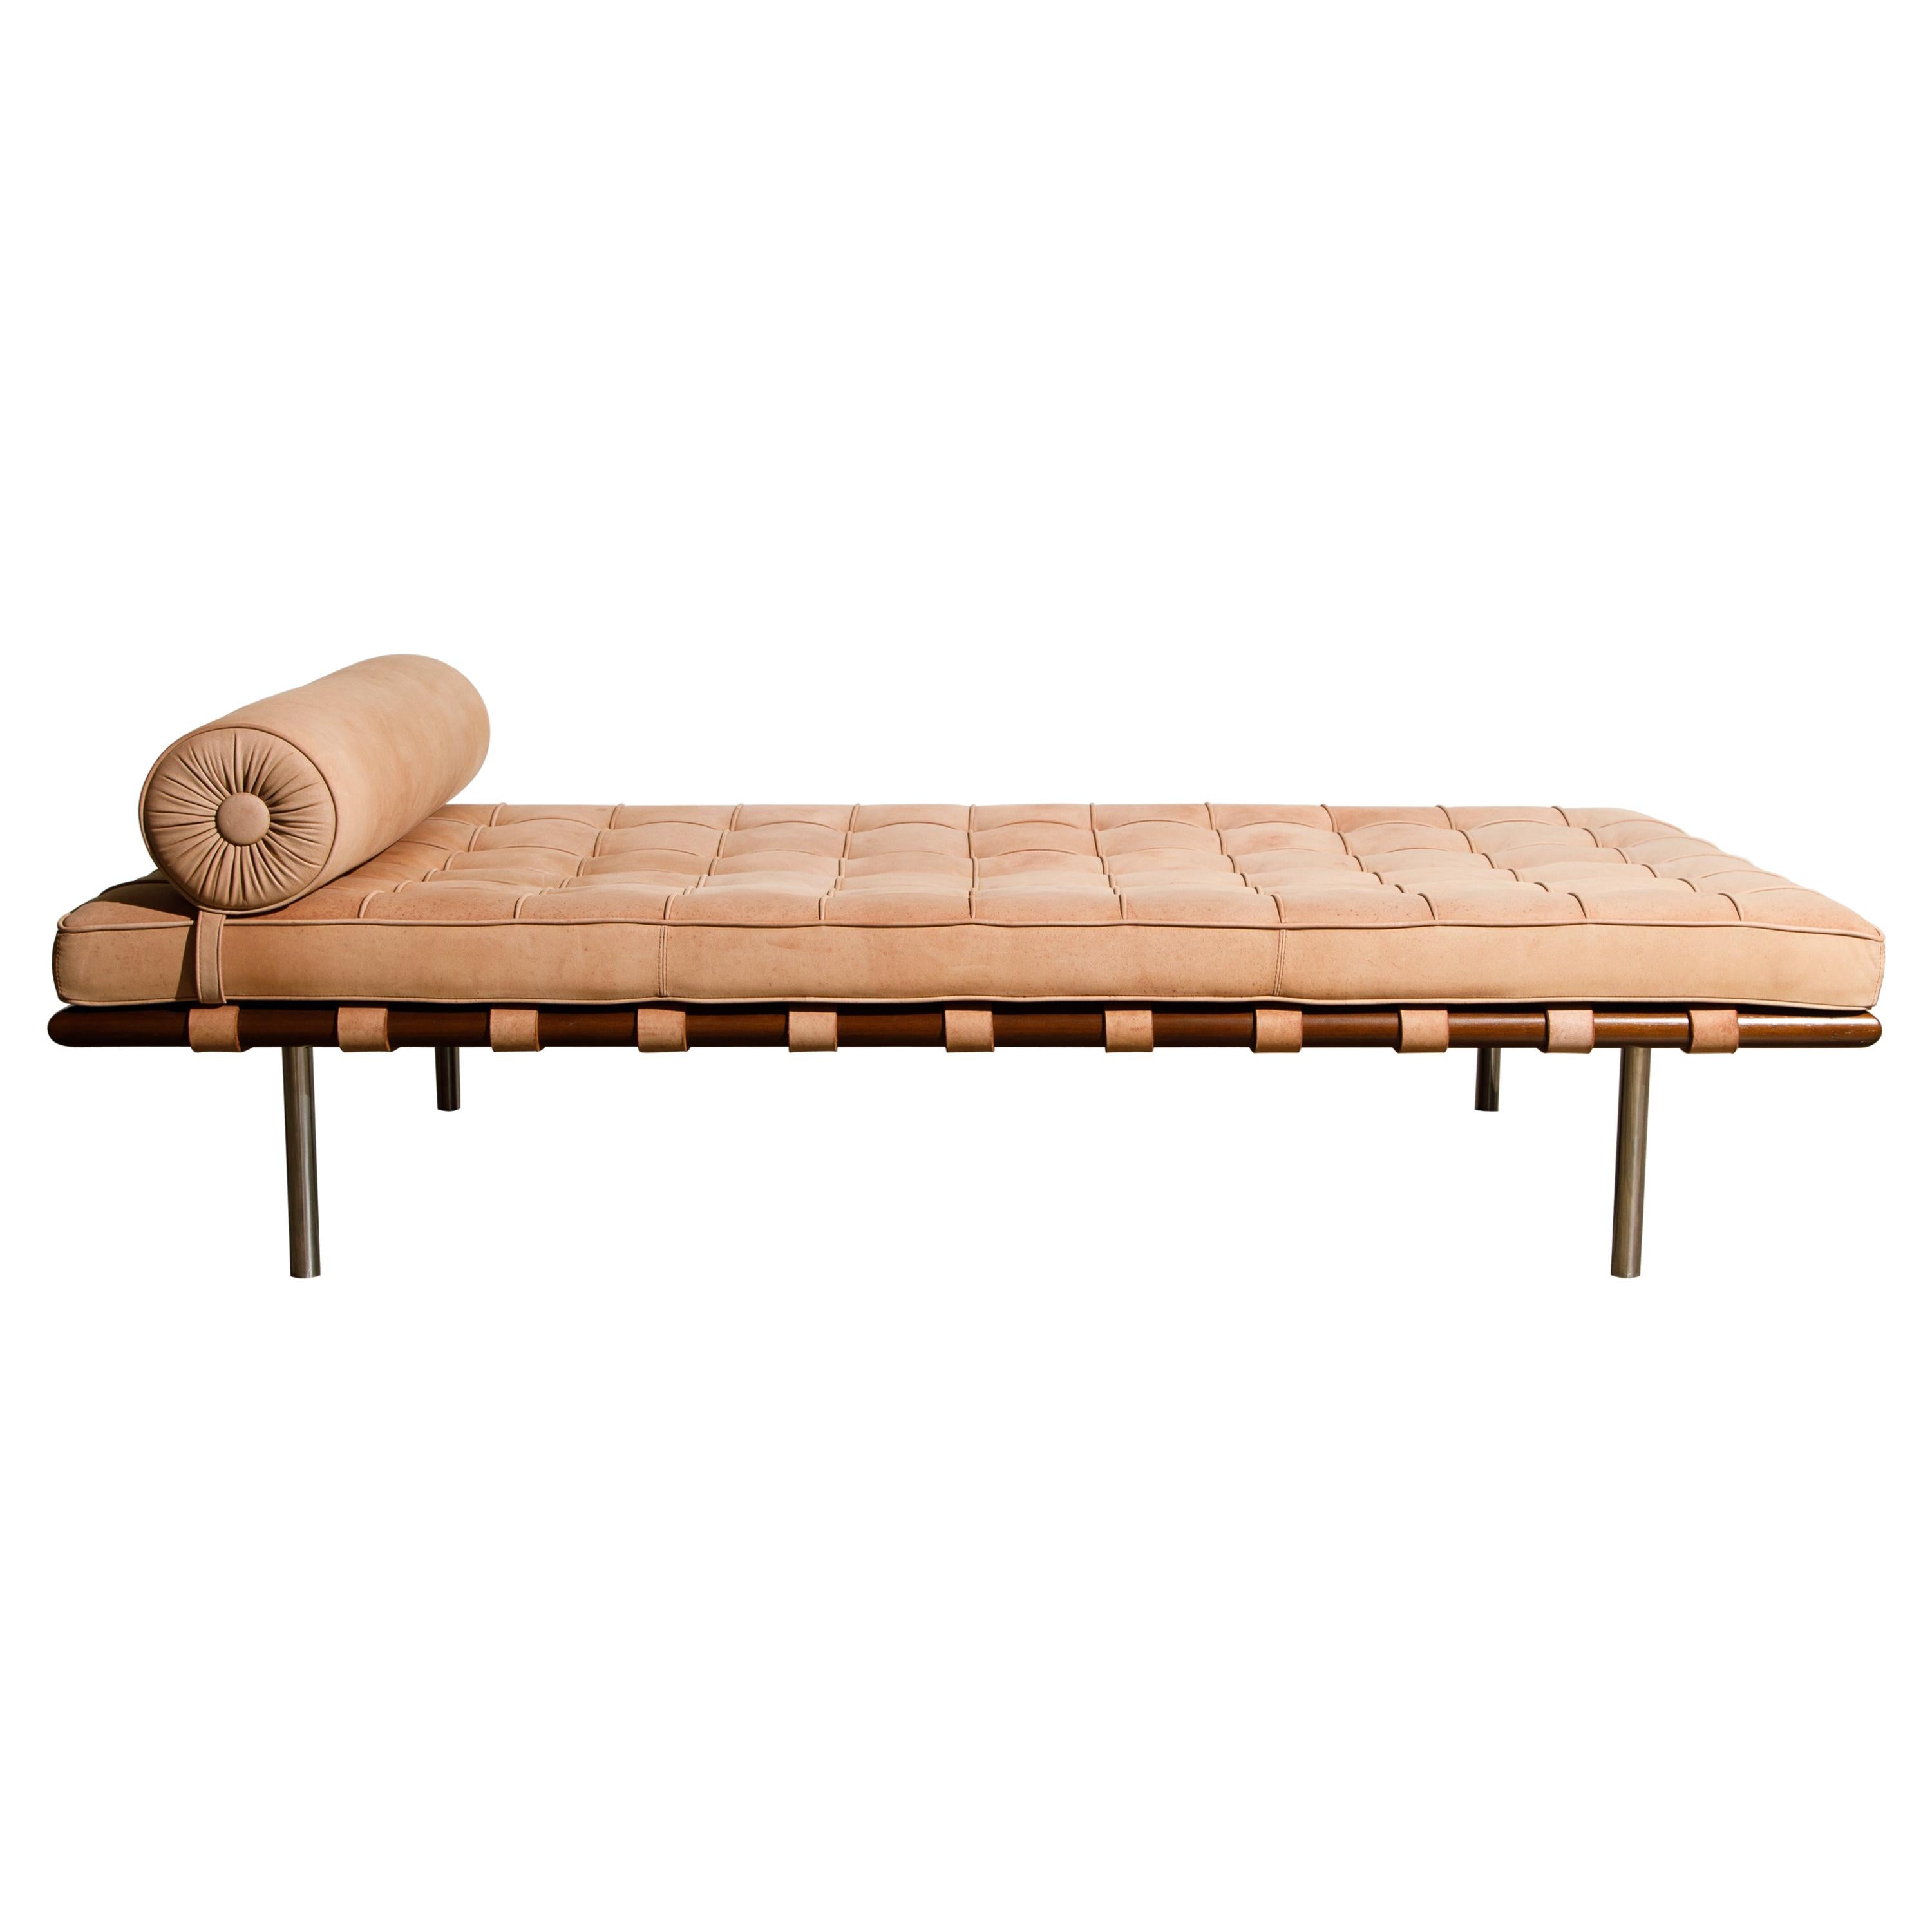 Barcelona Daybed in Nude Suede by Ludwig Mies van der Rohe for Knoll, Signed 